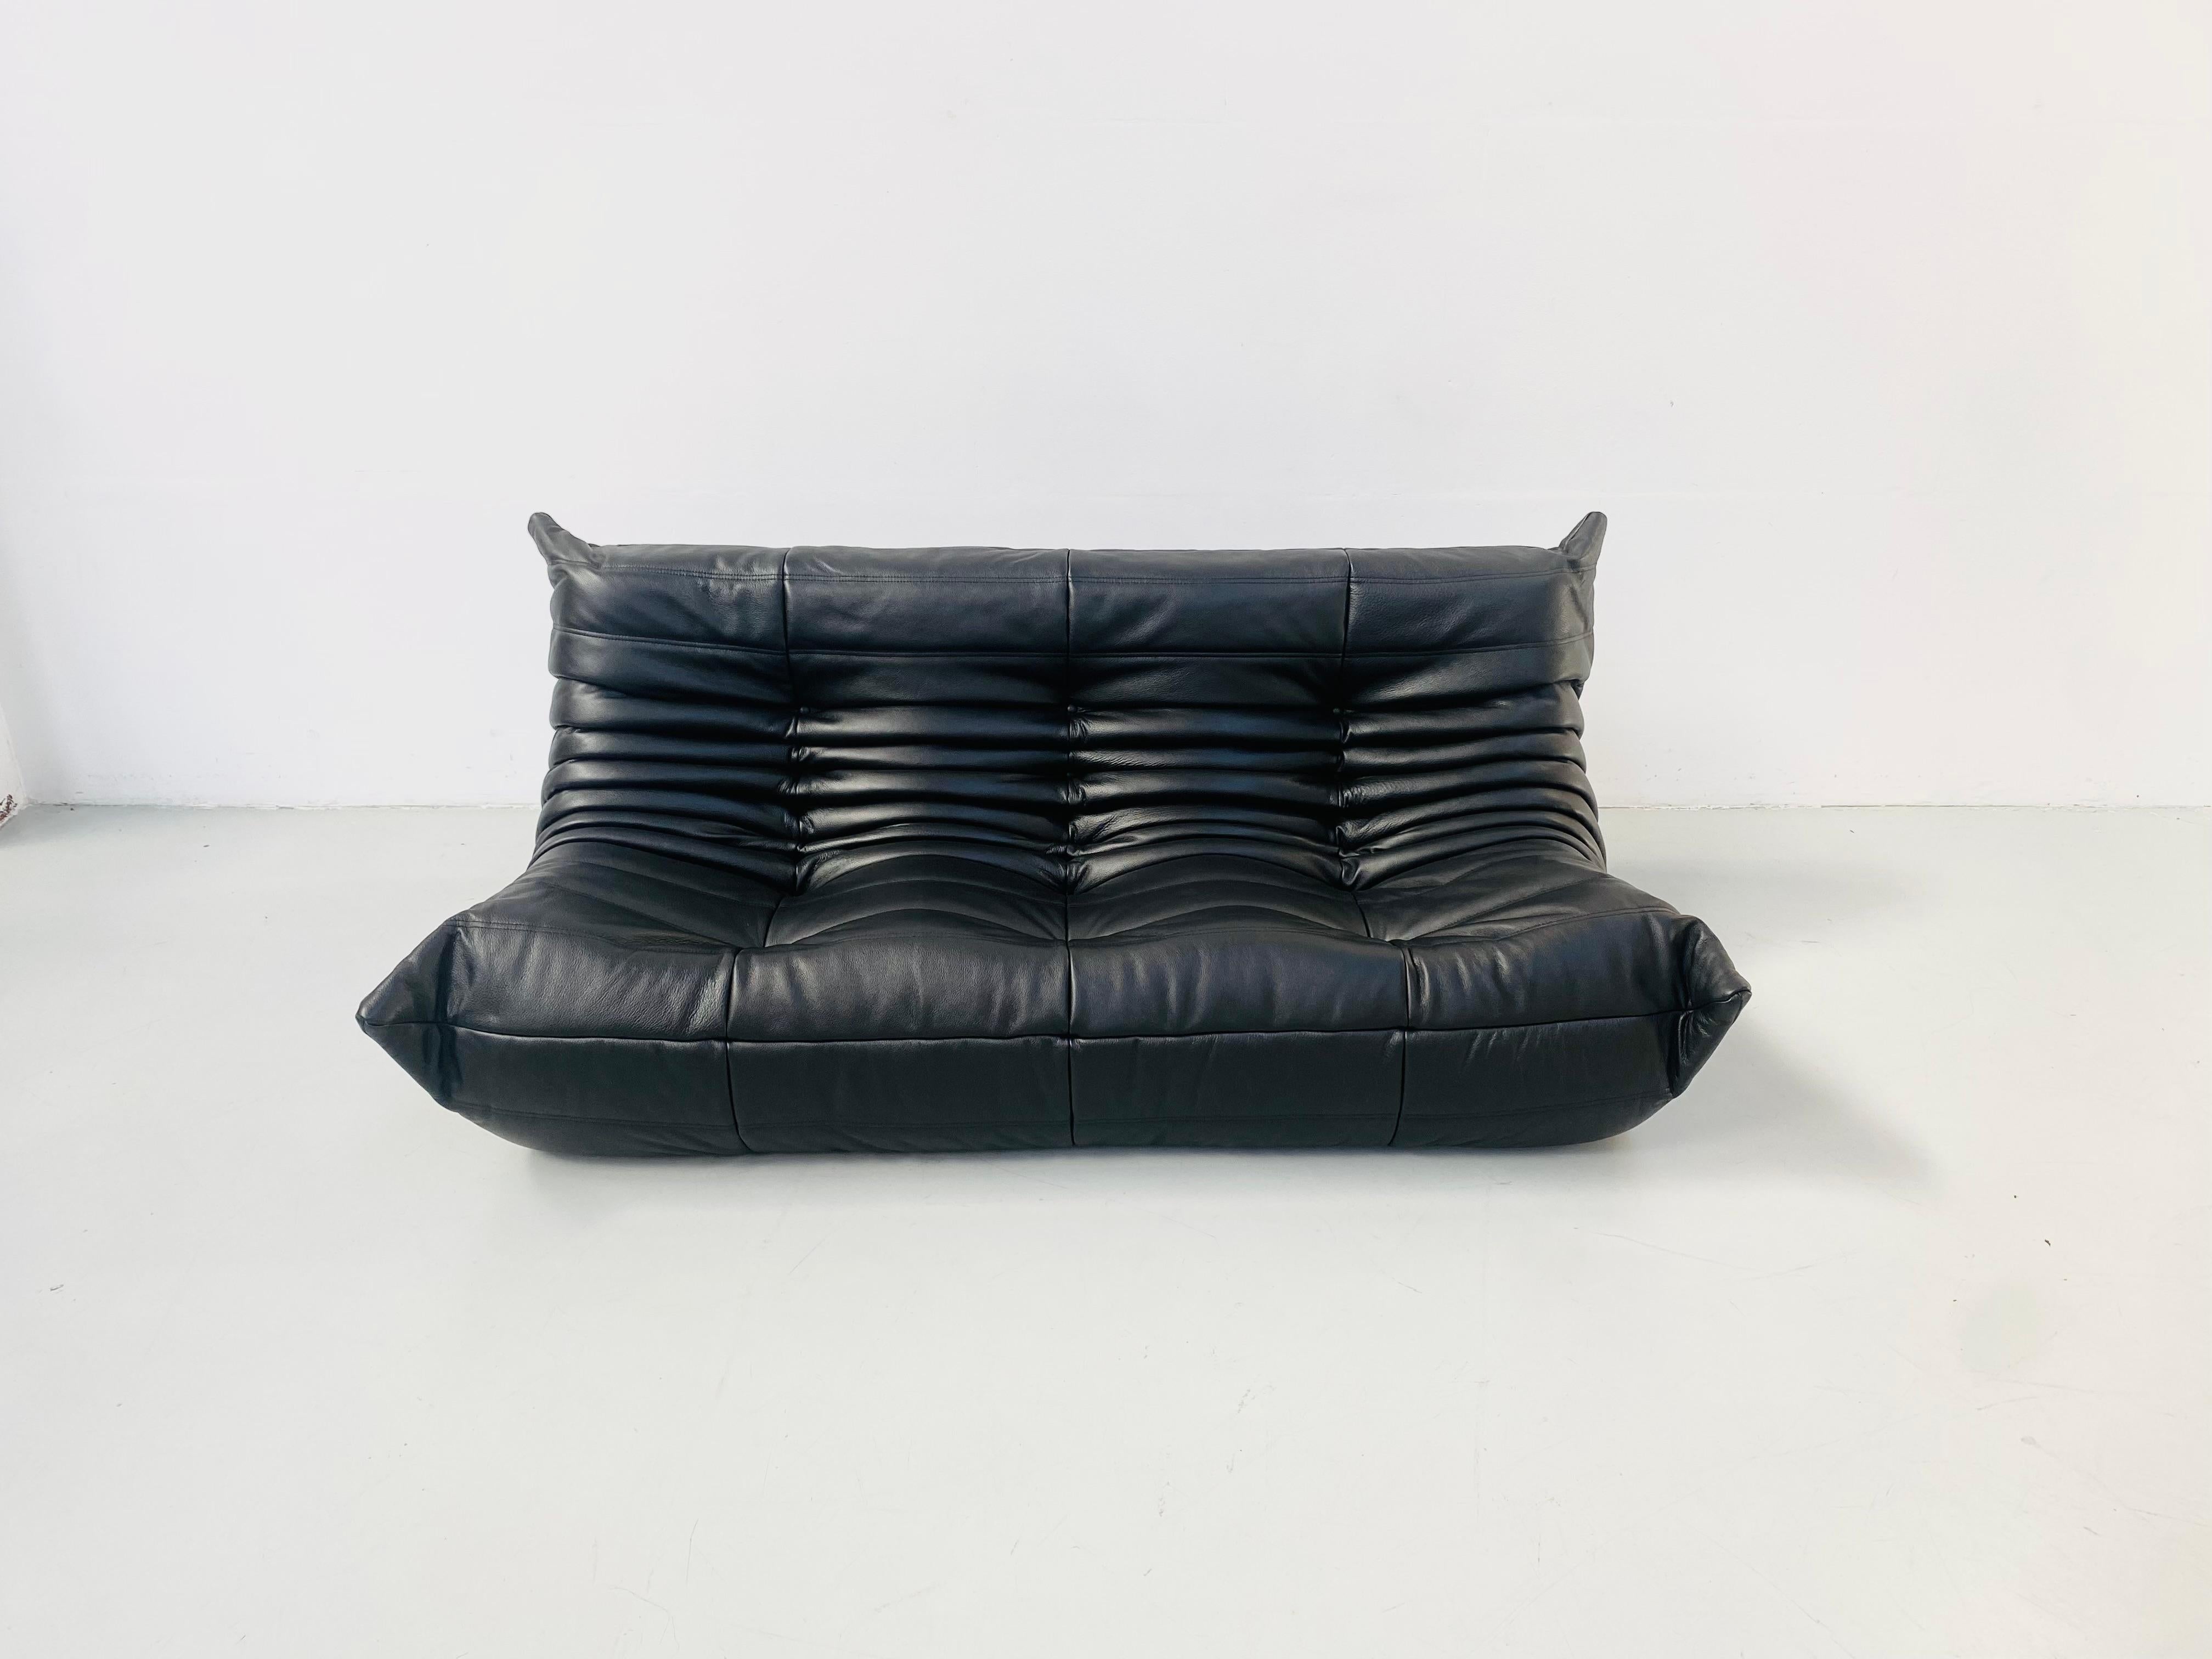 The Togo was designed by Michel Ducaroy in 1973 for Ligne Roset. It is the first piece of furniture ever made only of foam and leather. The innerwork consists of foam in 5 different densities. Produced by the high end furniture house Ligne Roset in